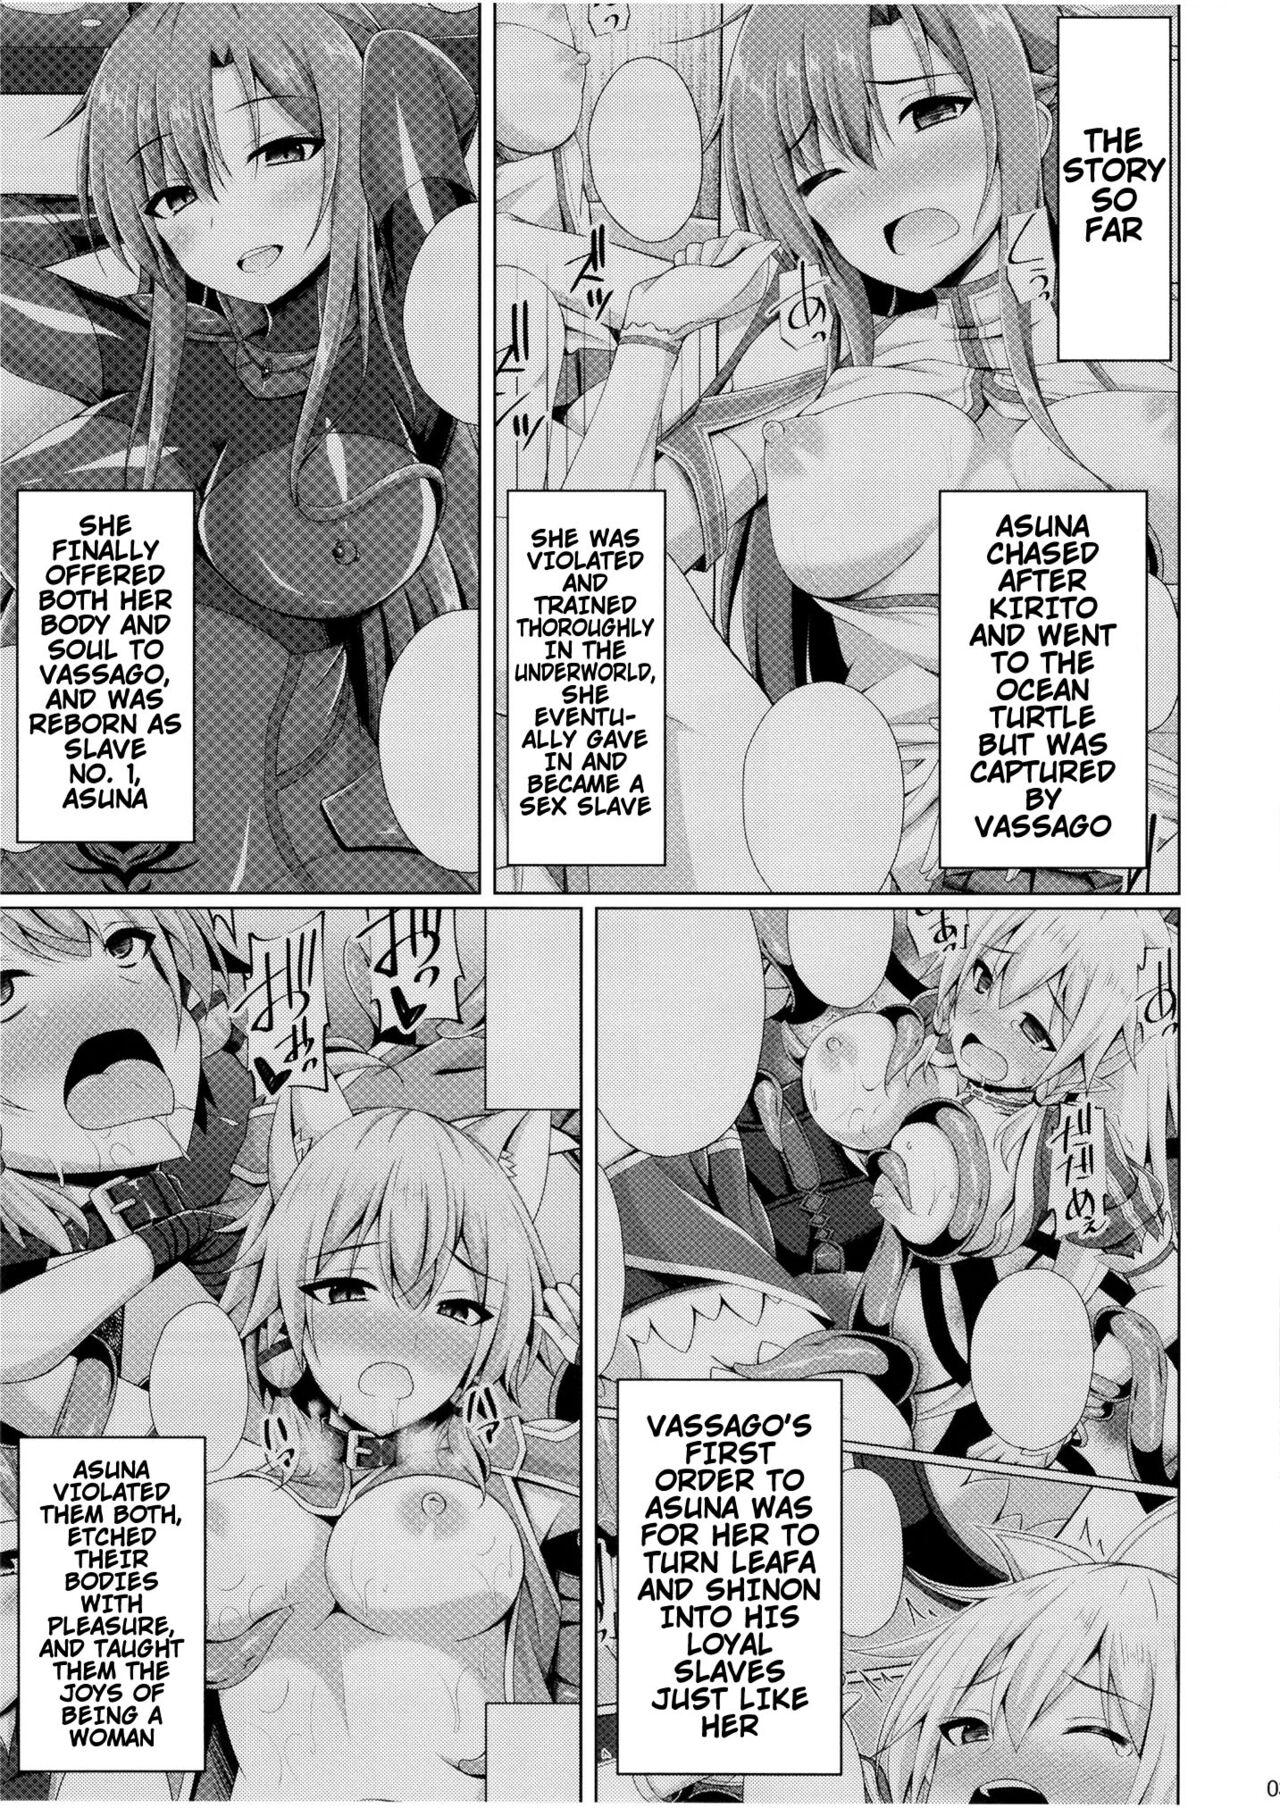 Fat Kuro no Kenshito Yobareta Ore wa mou nai... | There's Nothing Left Of Me From When I Was The Black Knight - Sword art online Black Thugs - Page 2